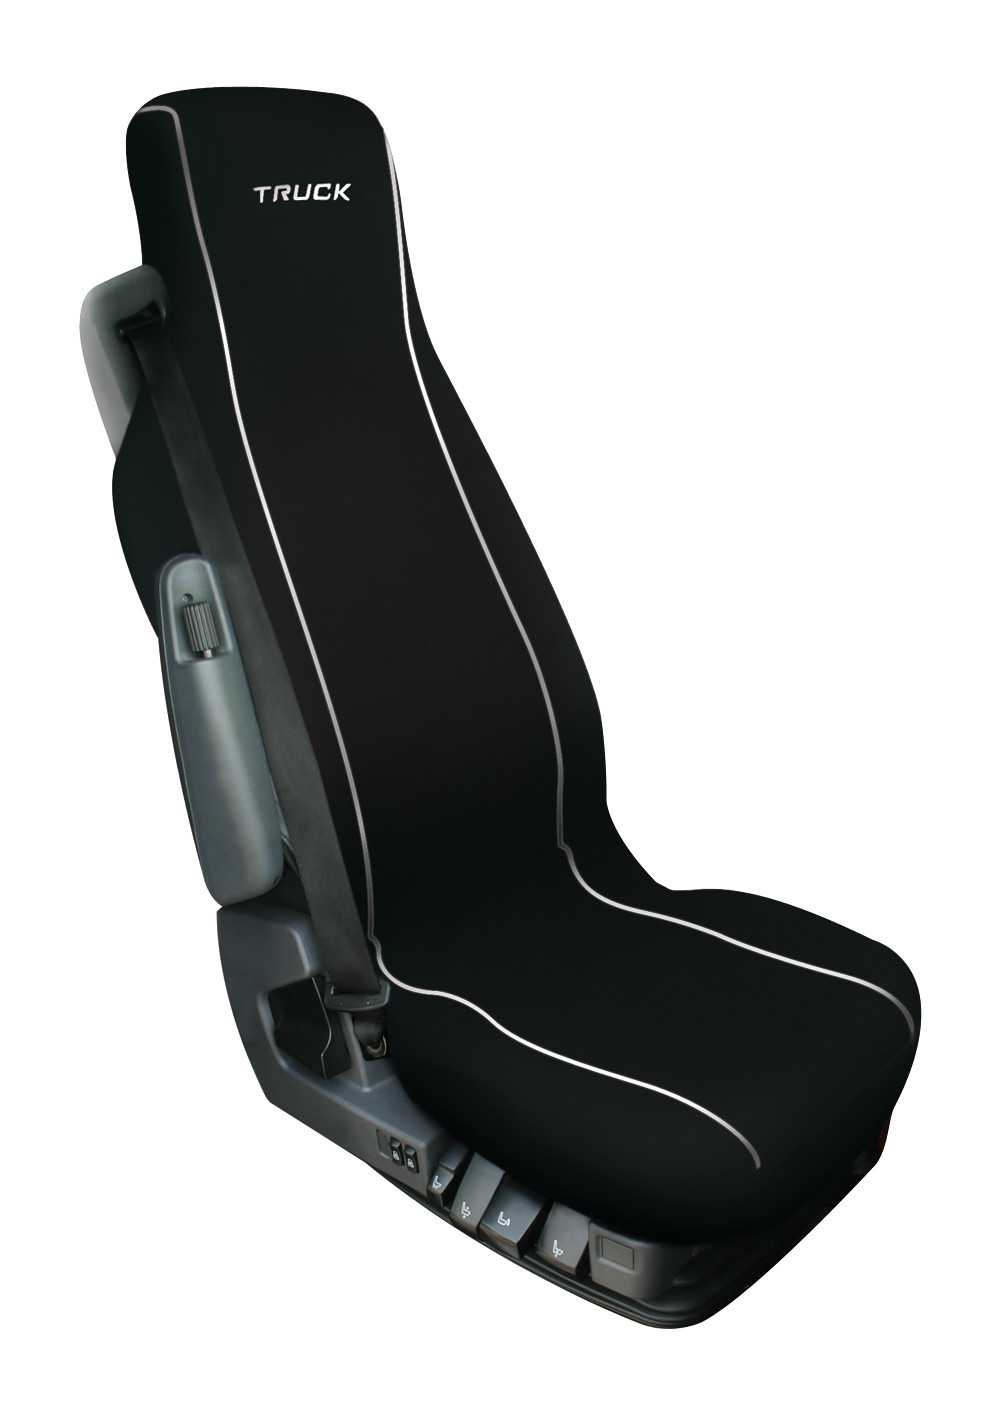 Silvia, cotton truck seat cover - Black - Resealed thumb